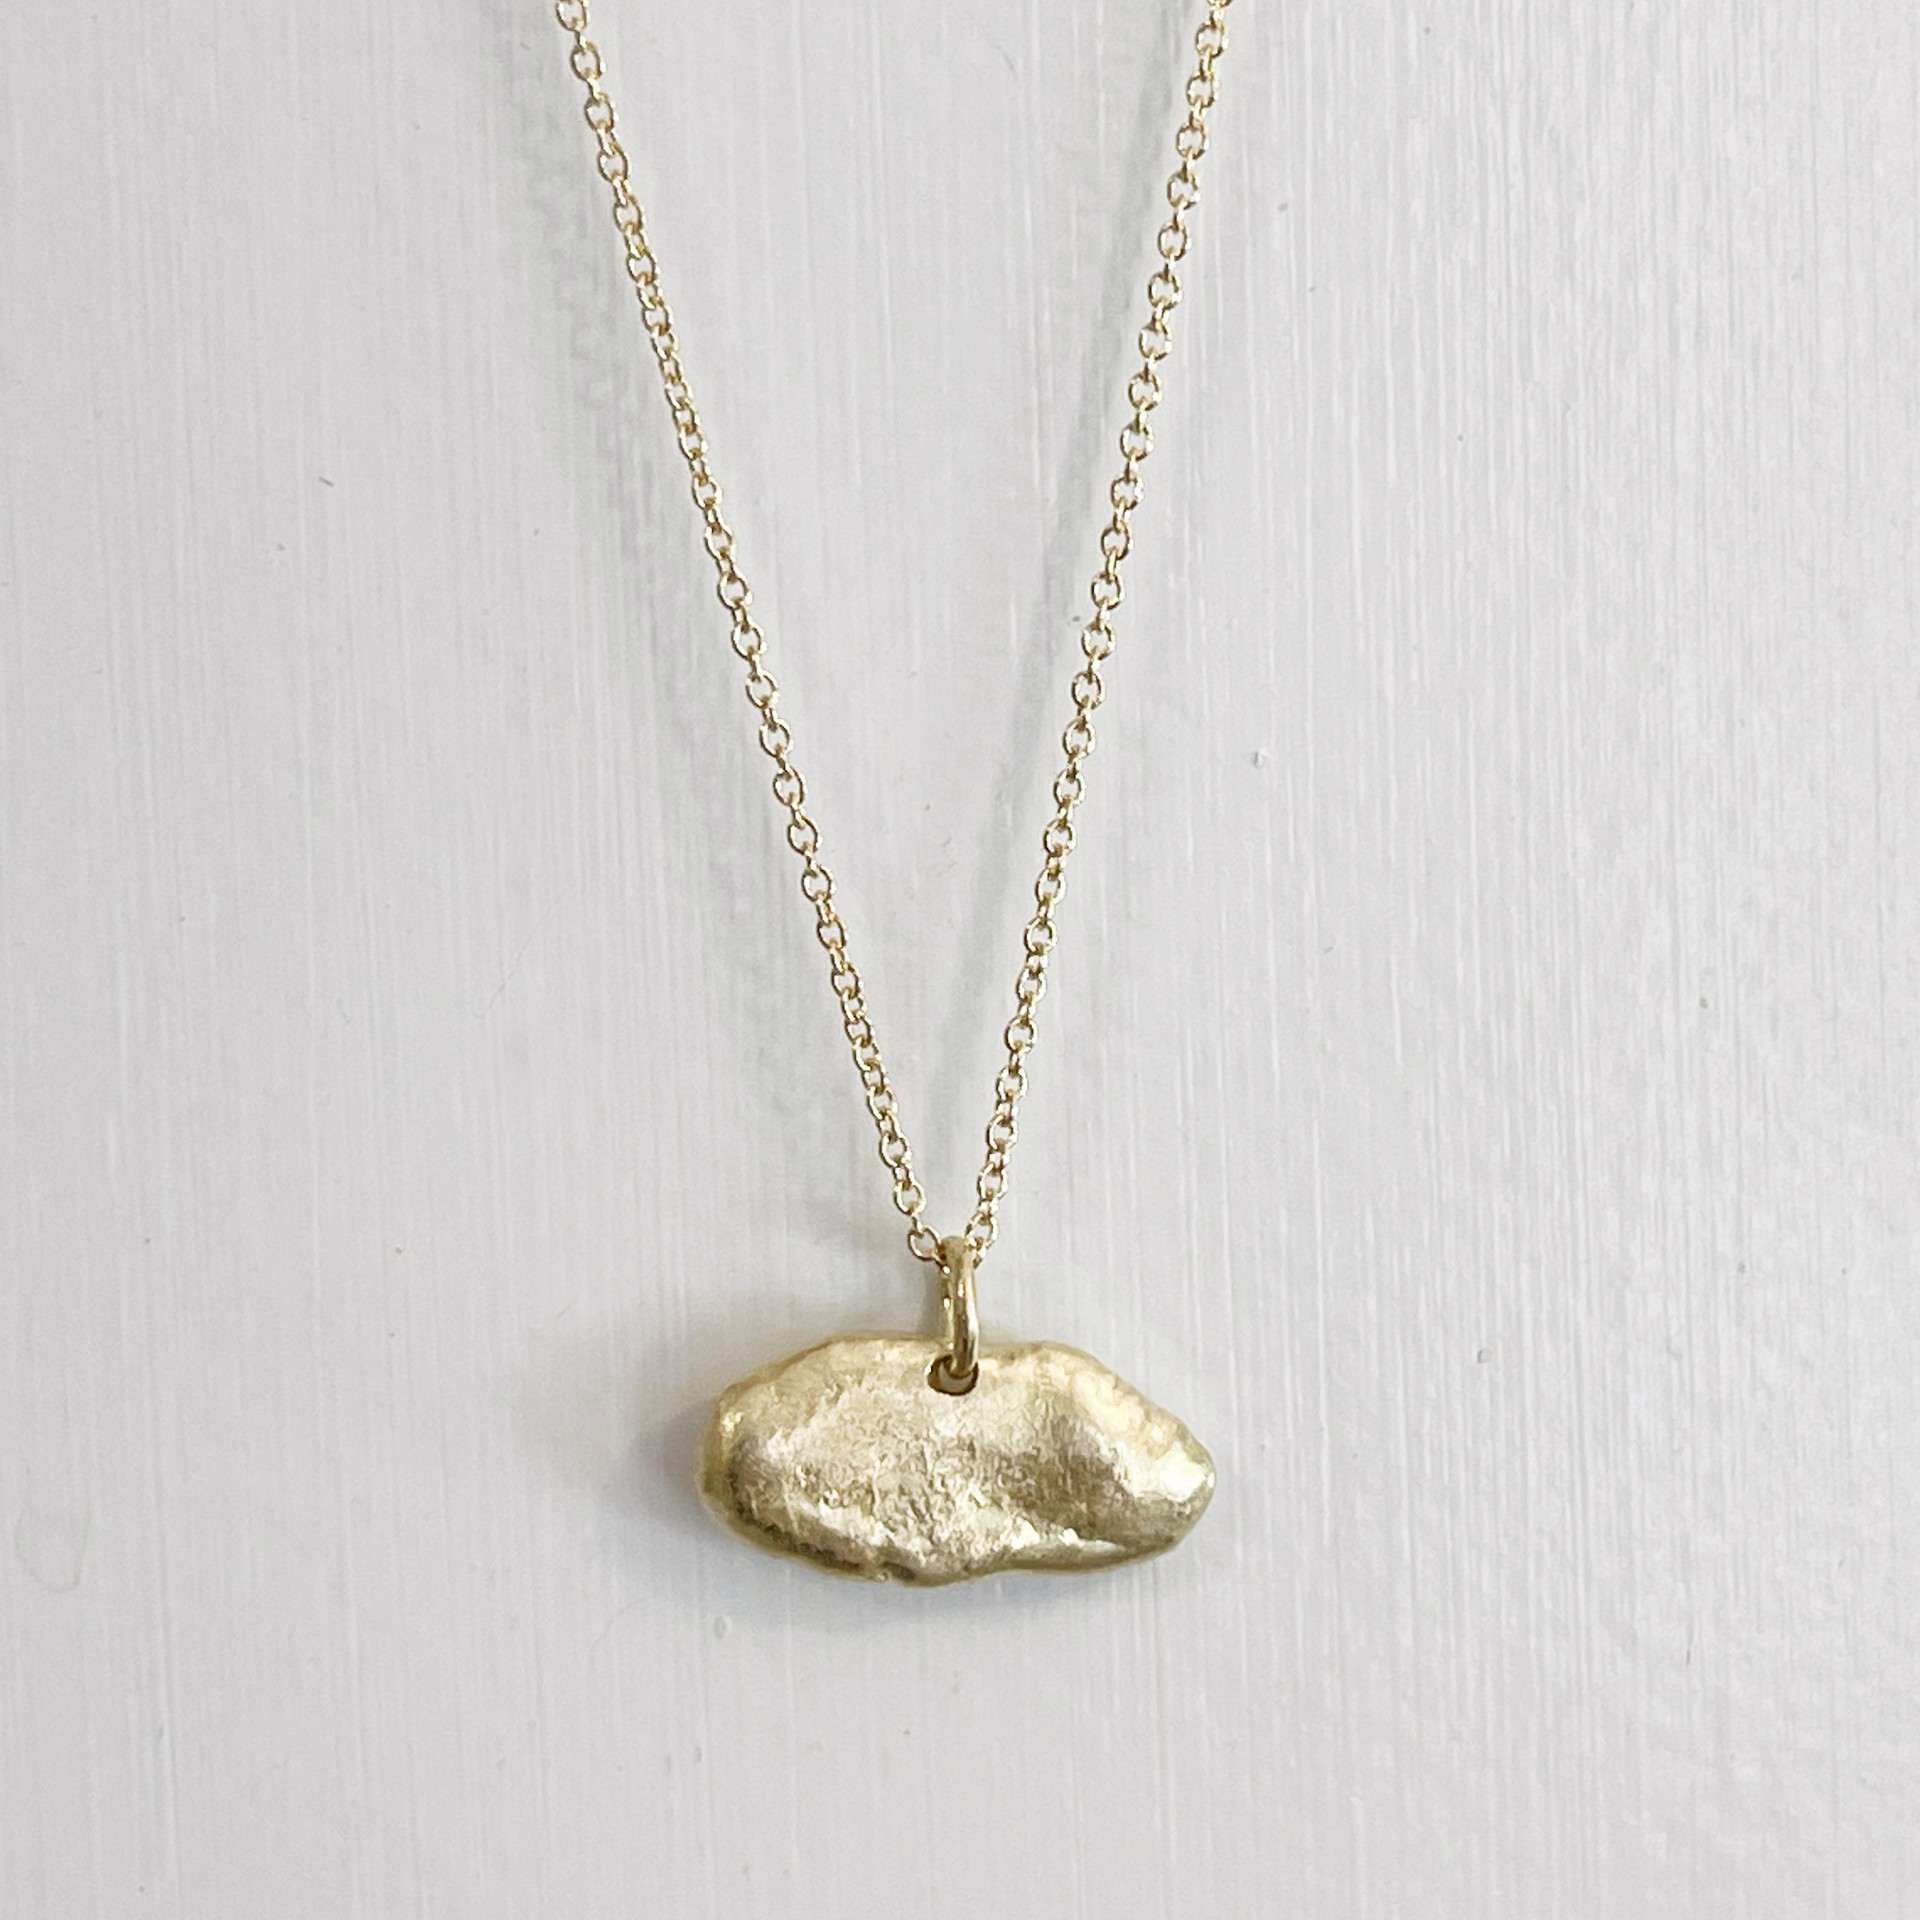 LHN21- Sideways Melted Pendant on Cable Chain 18" 18k Gold by Leandra Hill